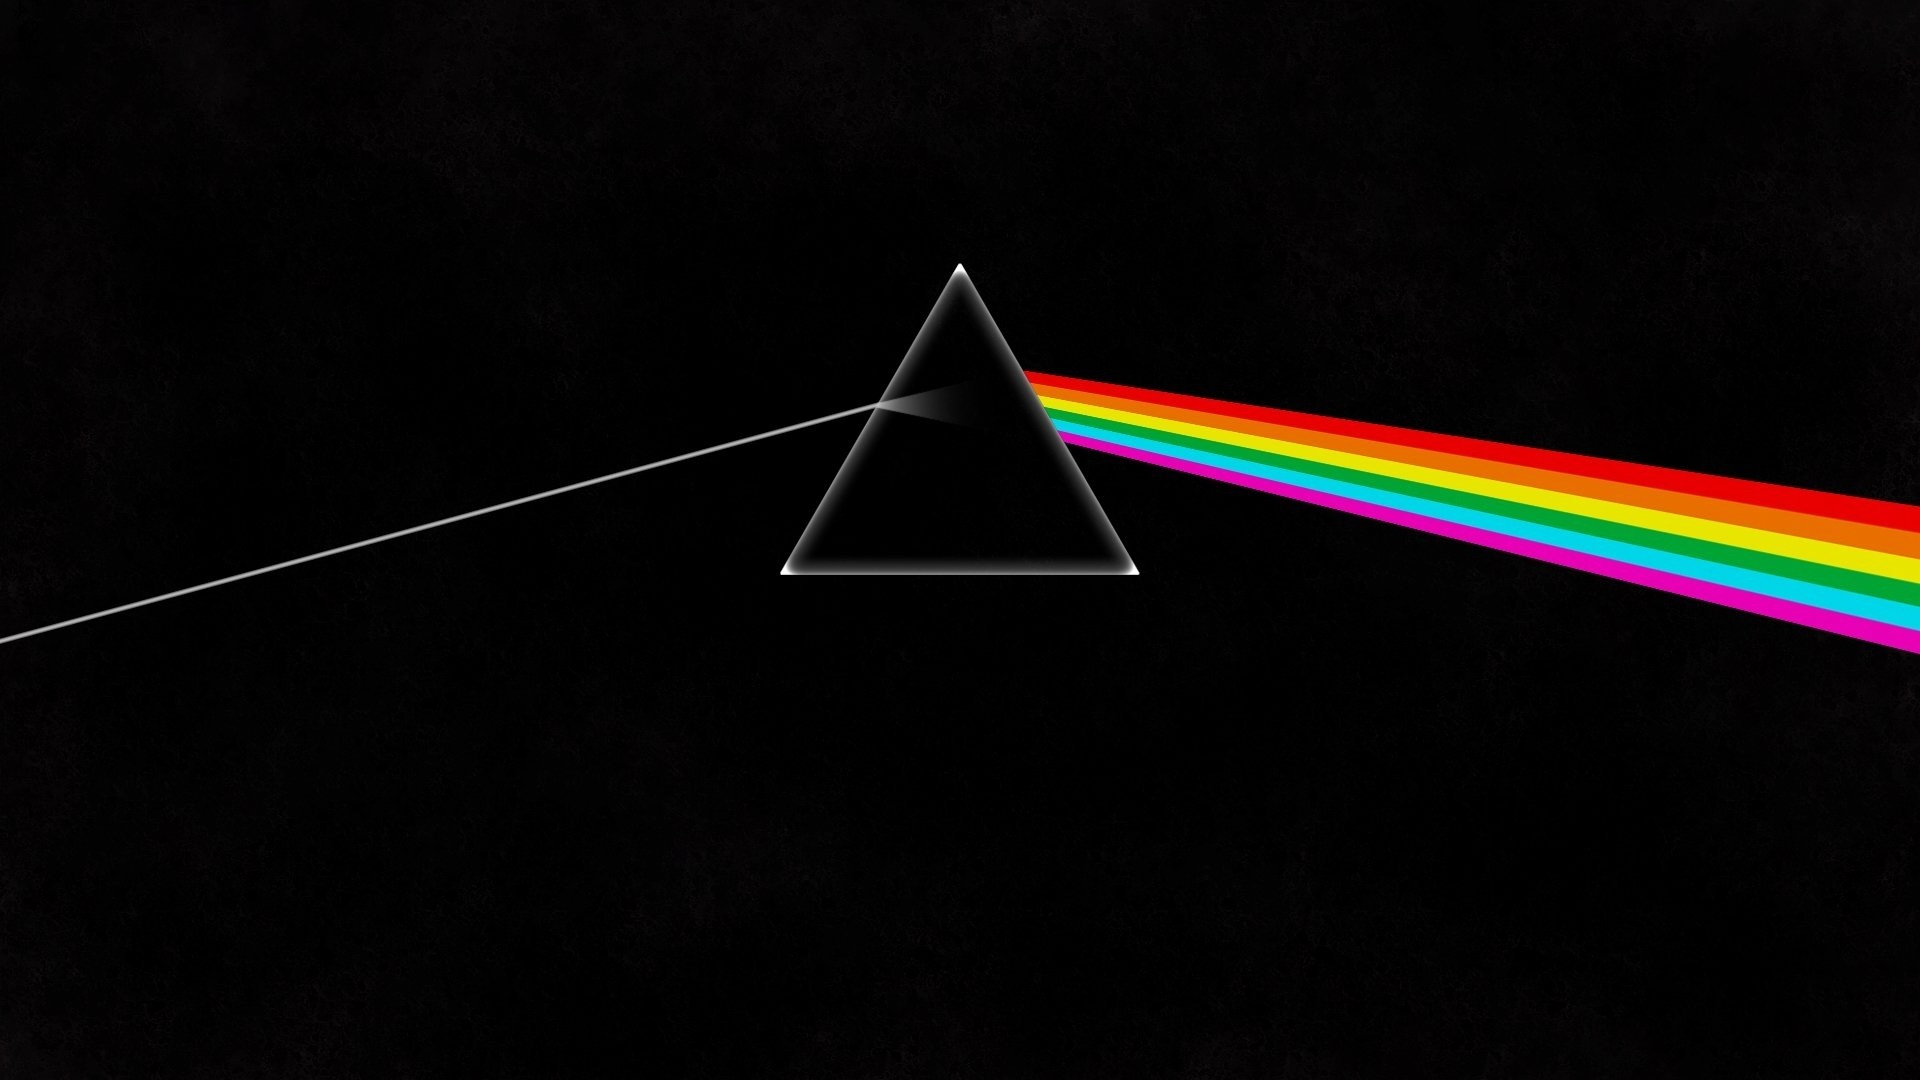 1920x1080 10 Most Popular Pink Floyd Wall Paper FULL HD 1080p For PC Background